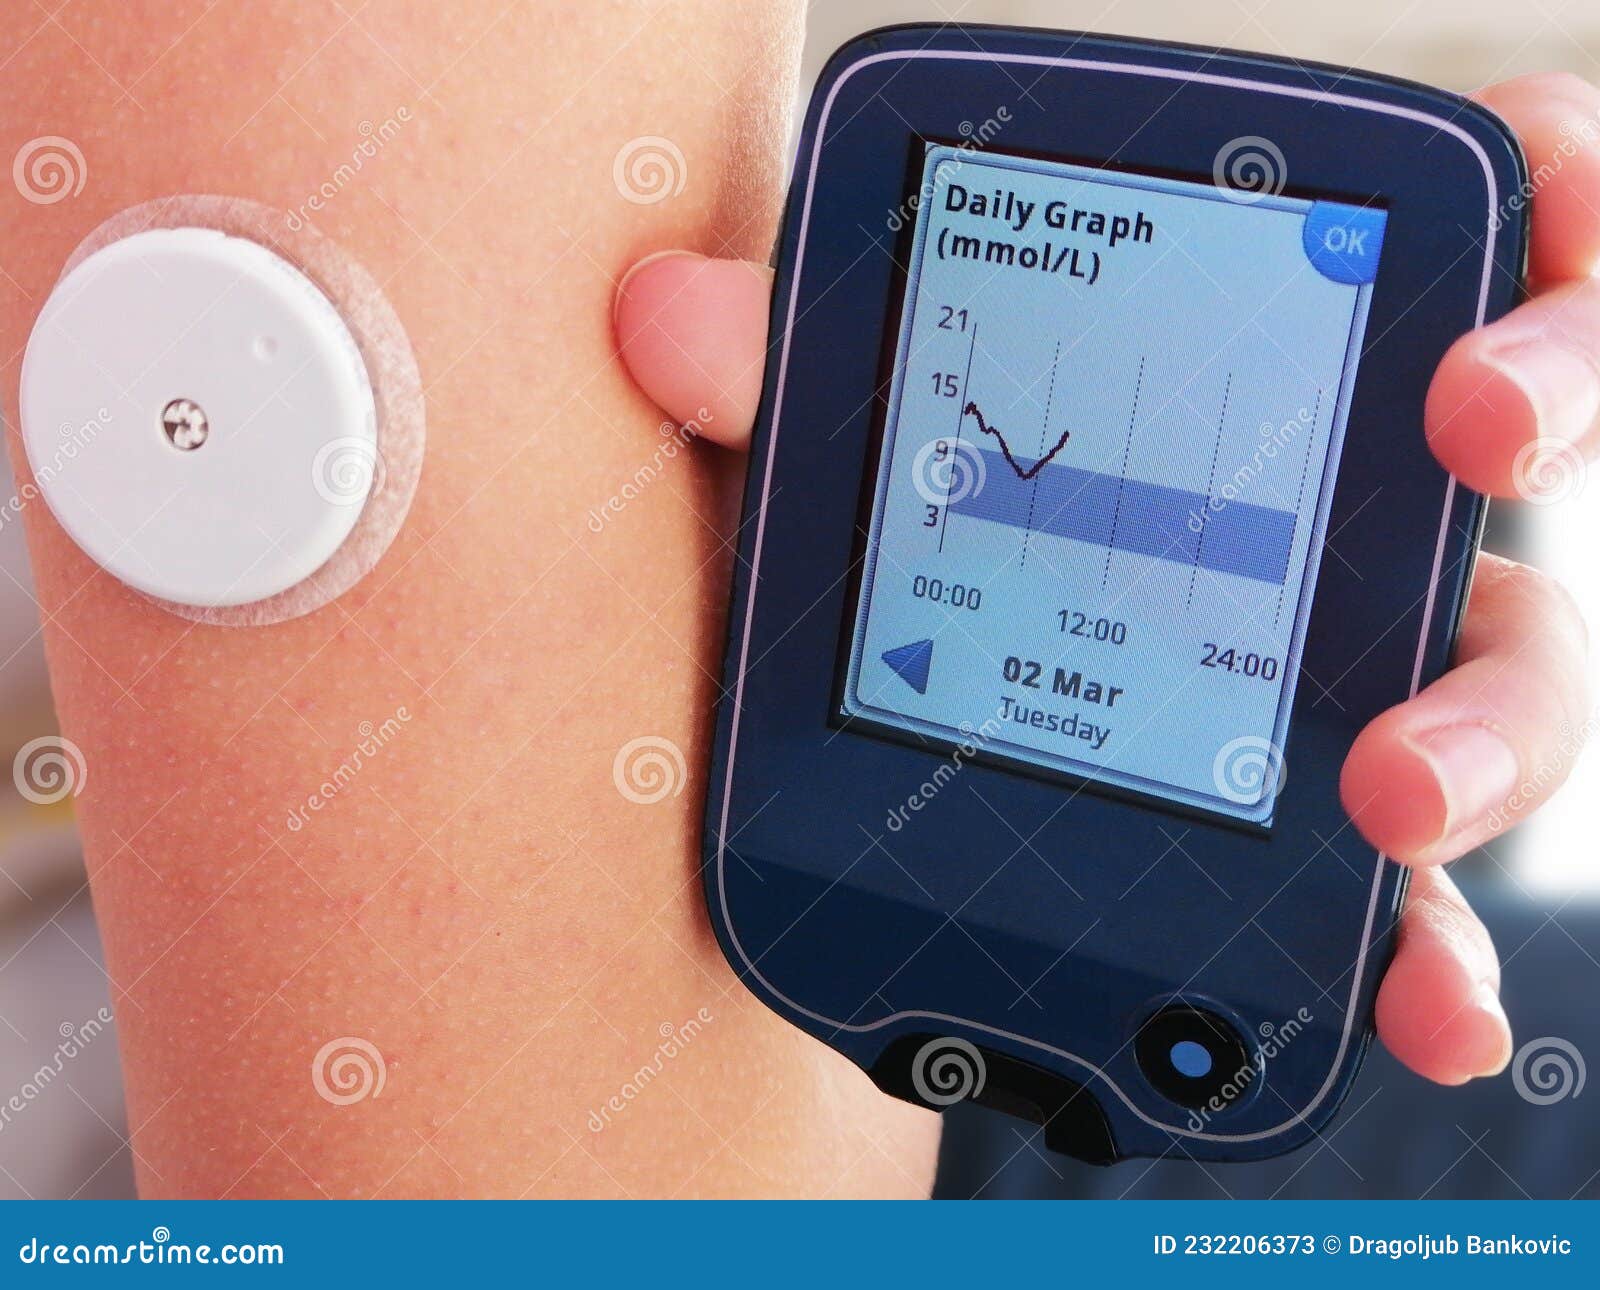 moment of  reading a glucose levels using device for continuous glucose monitoring in blood Ã¢â¬â cgm.